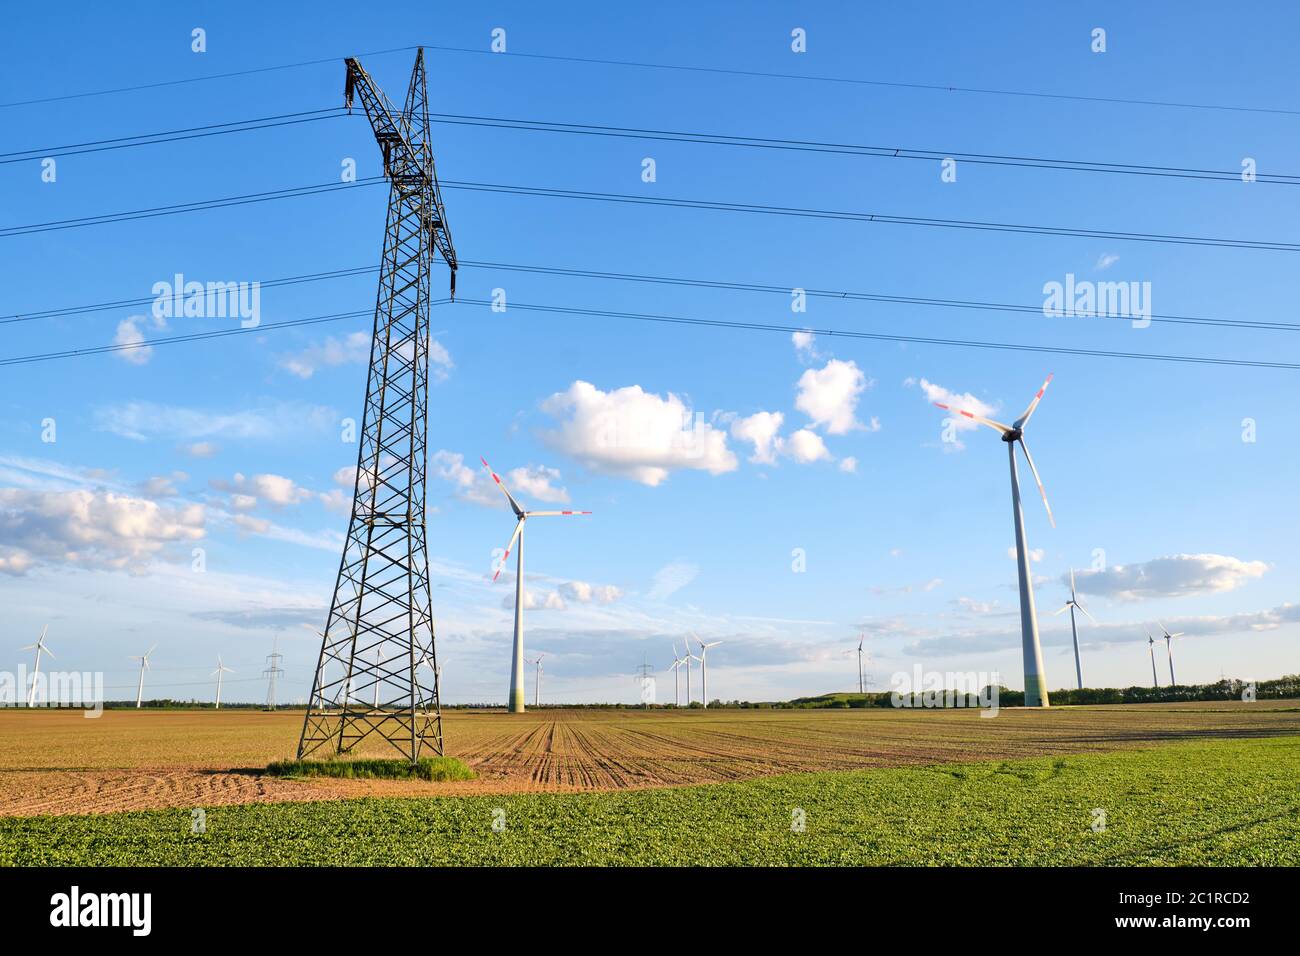 Electricity pylon with overhead lines and wind turbines seen in Germany Stock Photo